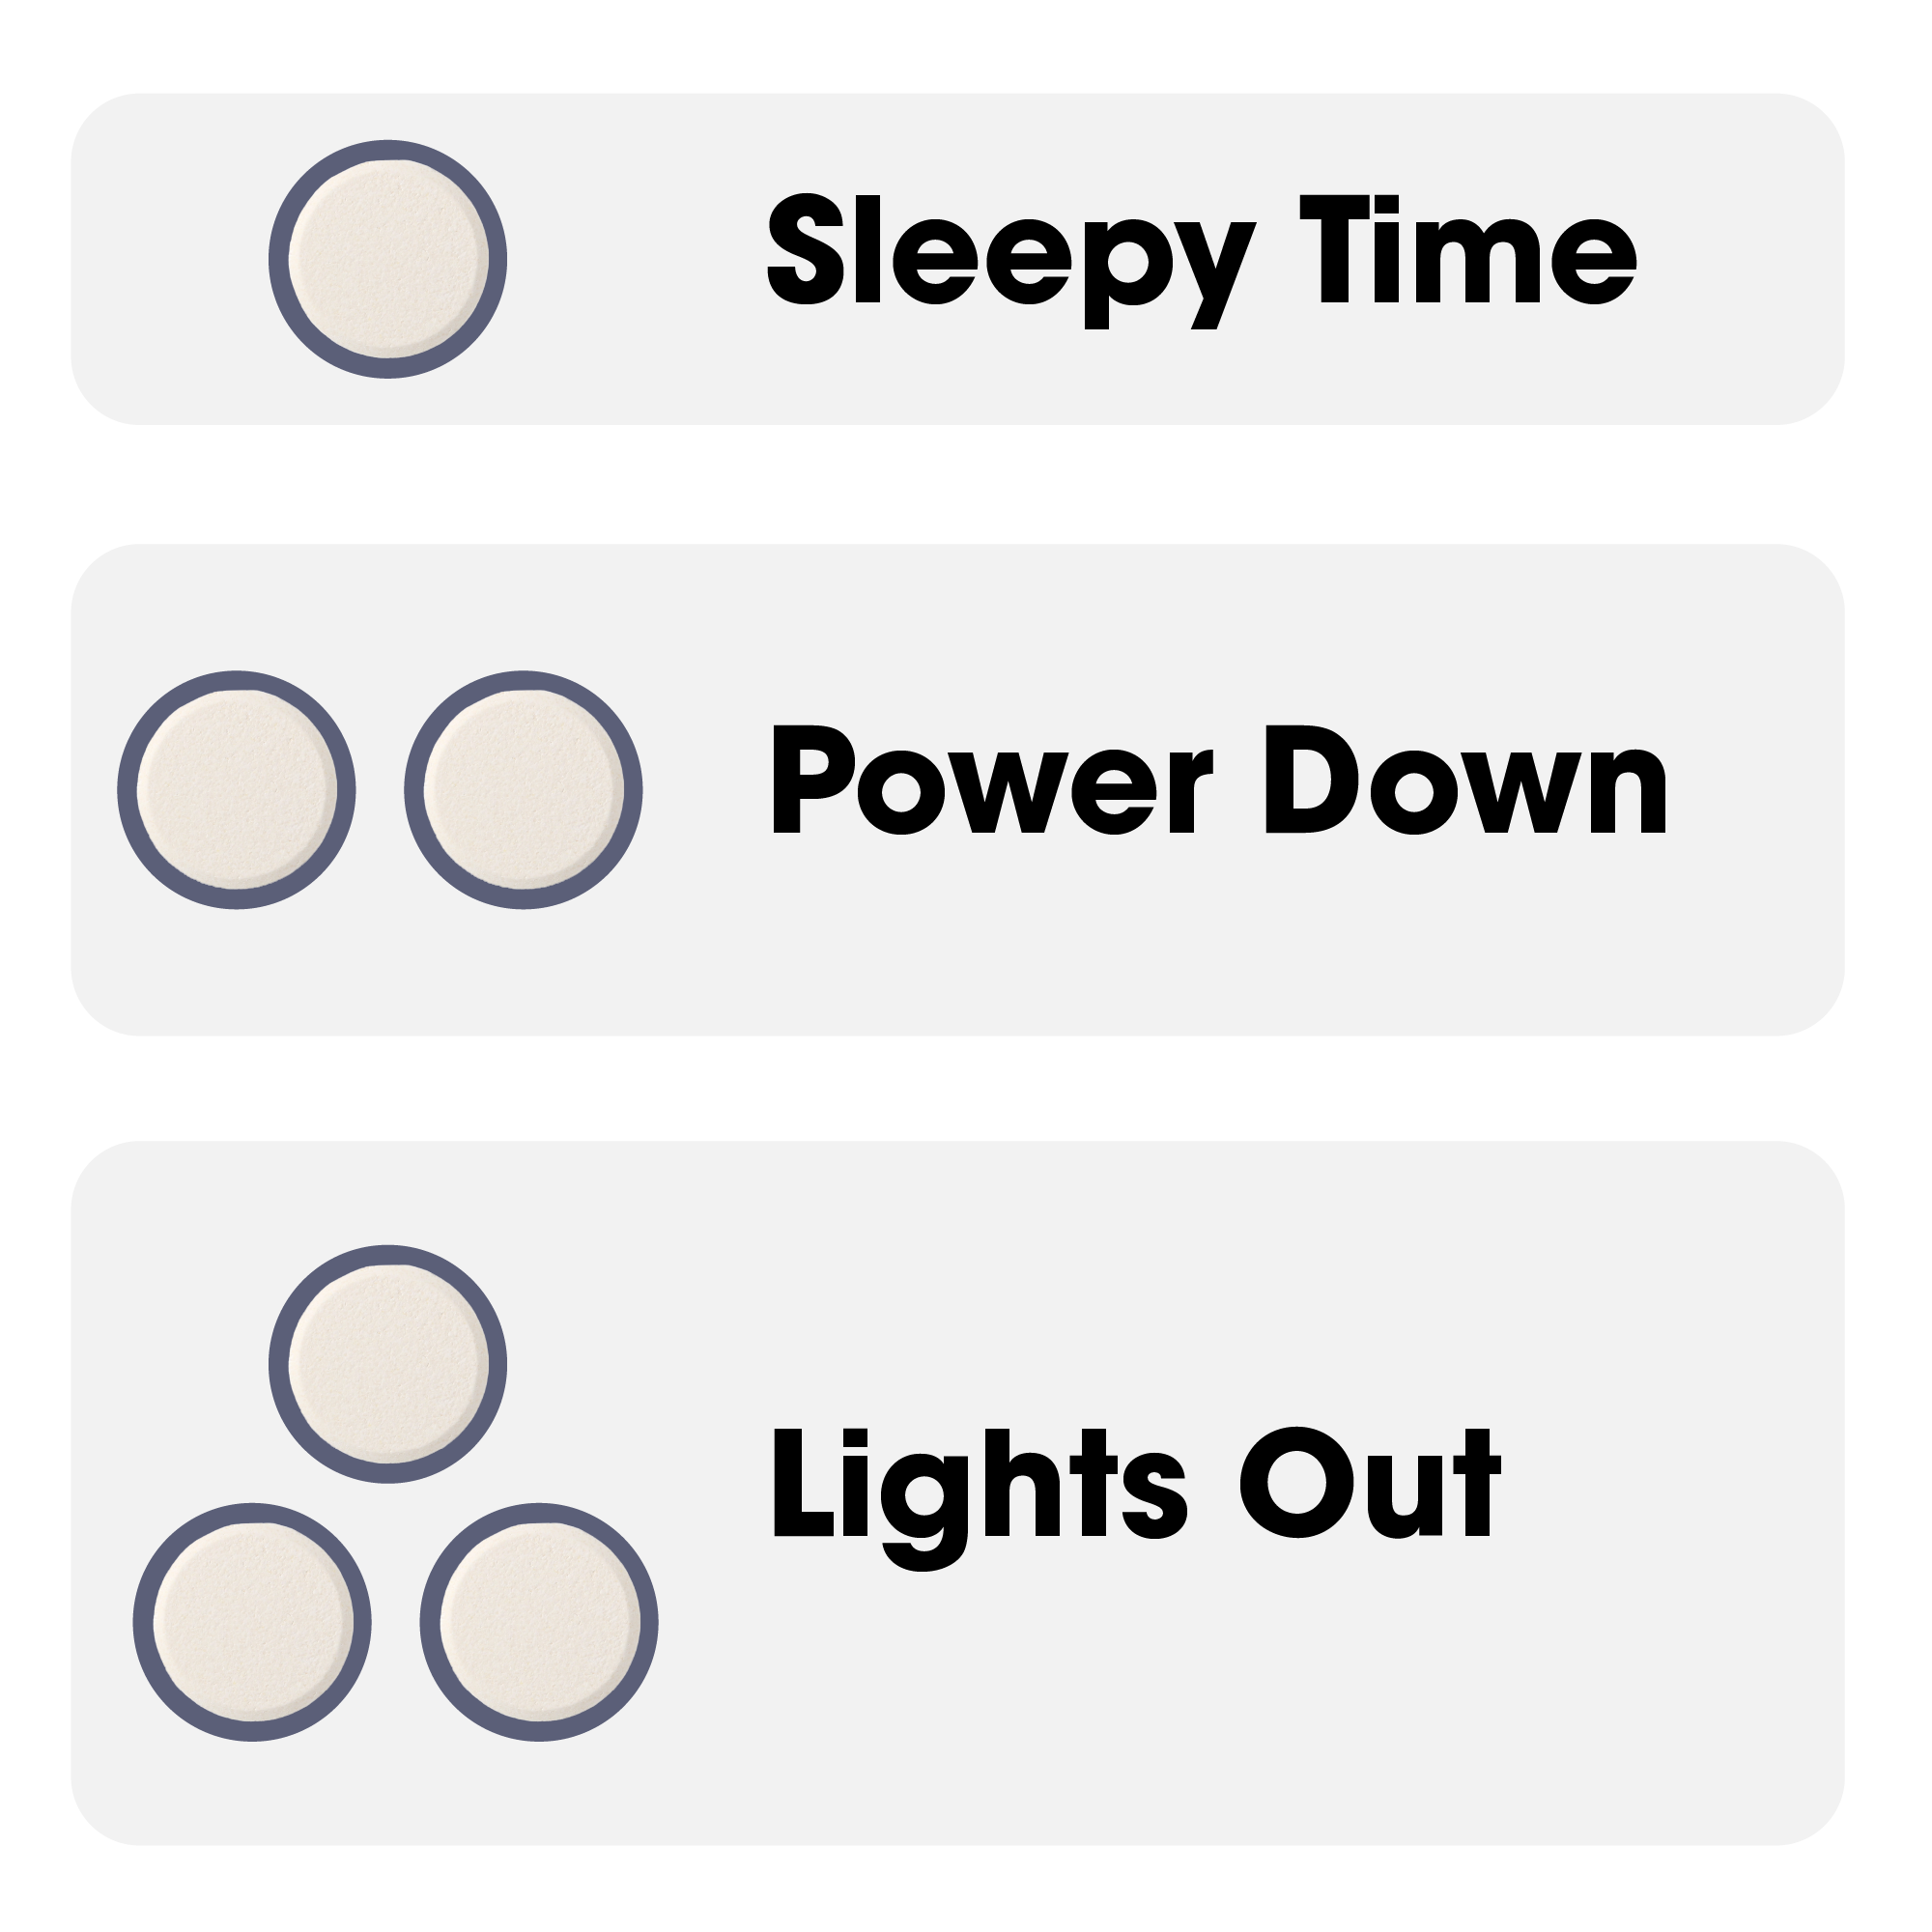 Dosages: 1 capsule promotes ‘sleepy time’, two capsules puts you ‘Power Down Mode’, three capsules is ‘Lights Out’